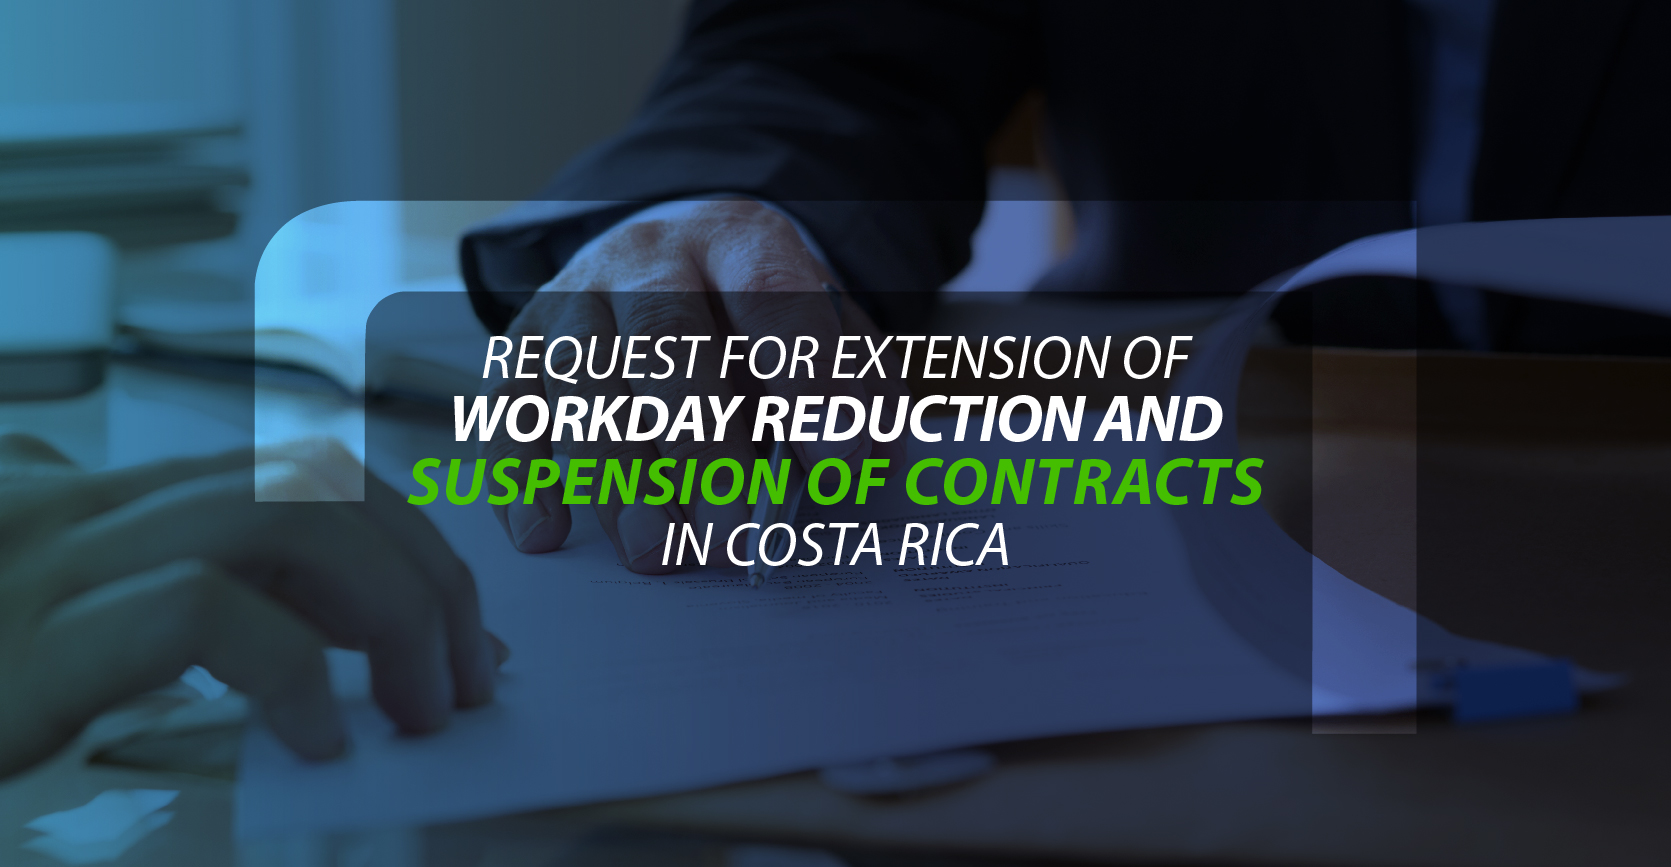 Request for Extension of Workday Reduction and Suspension of Contracts in Costa Rica